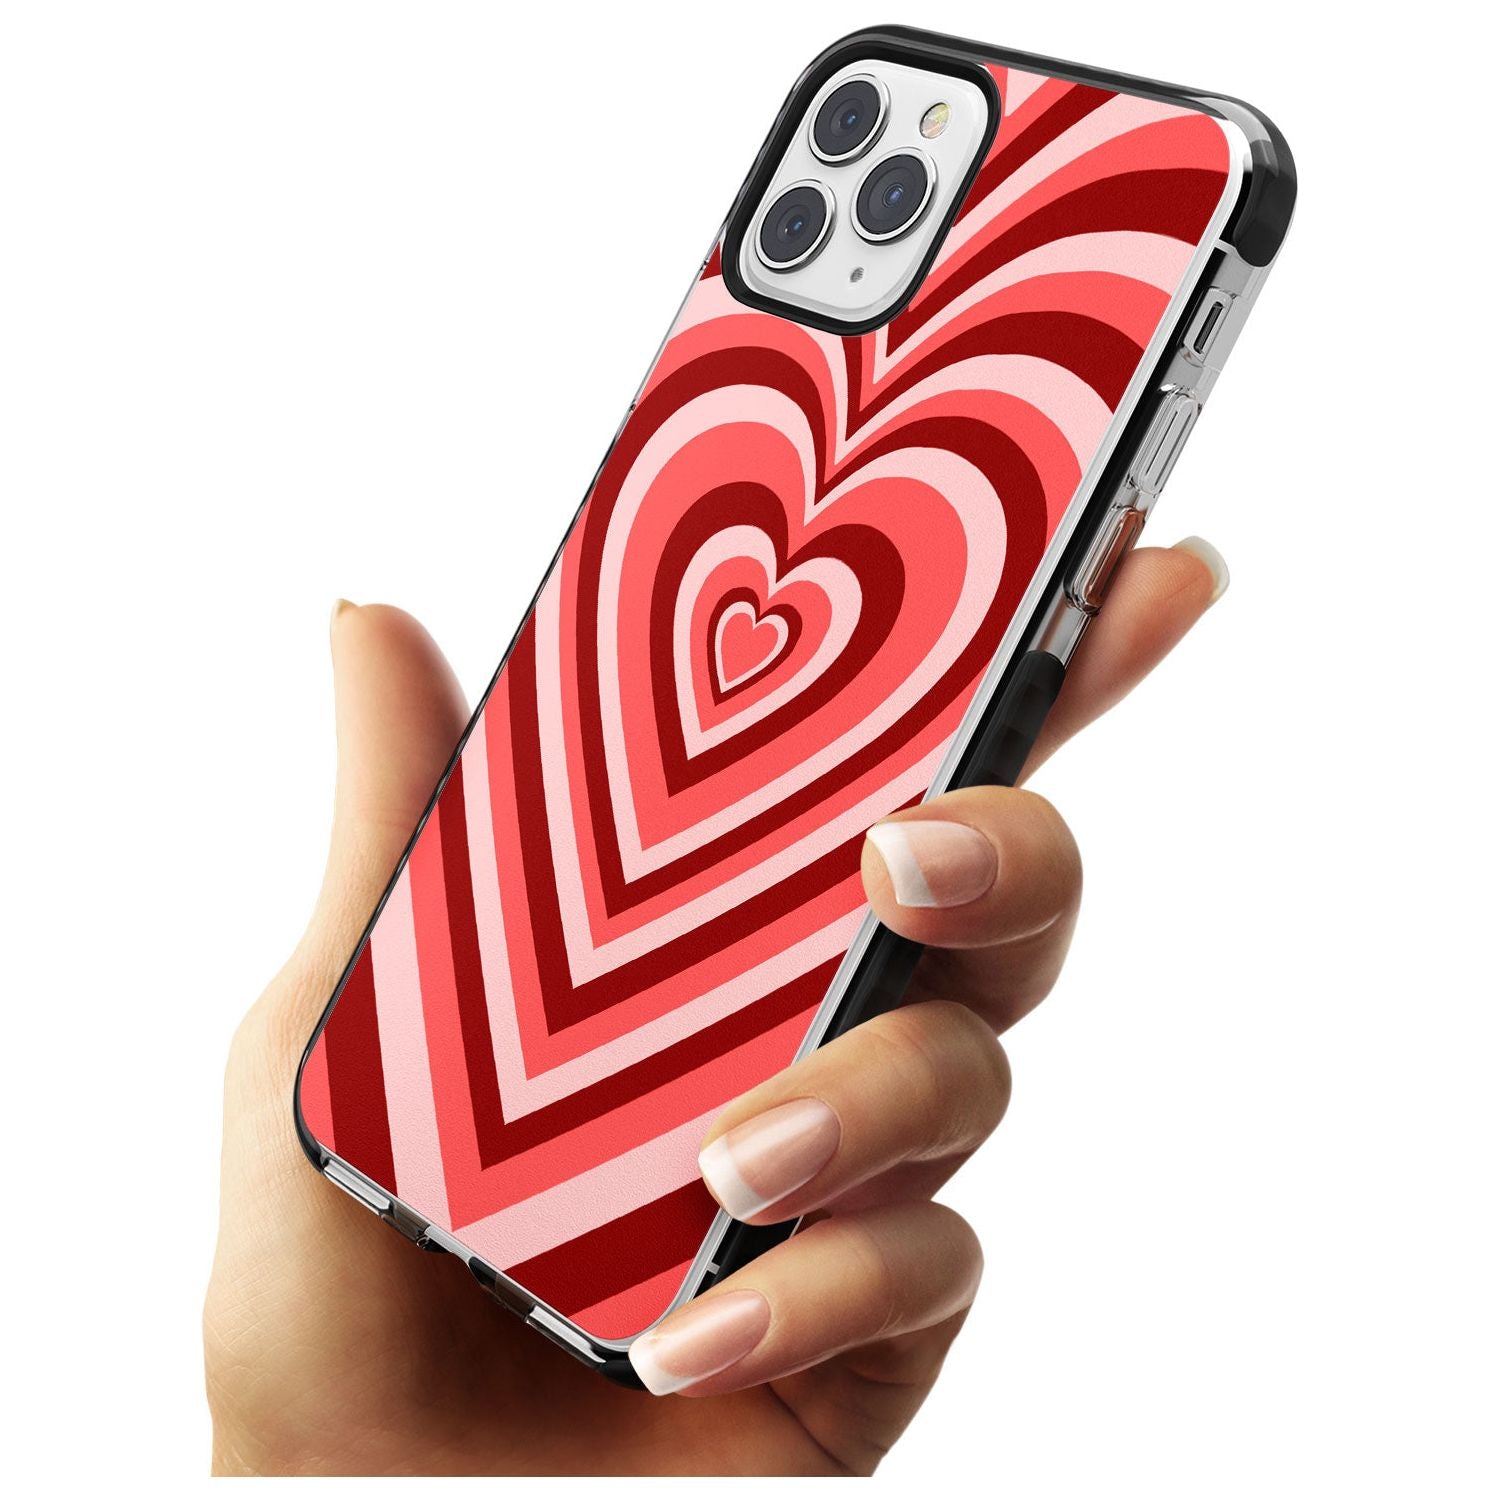 Red Heart Illusion Black Impact Phone Case for iPhone 11